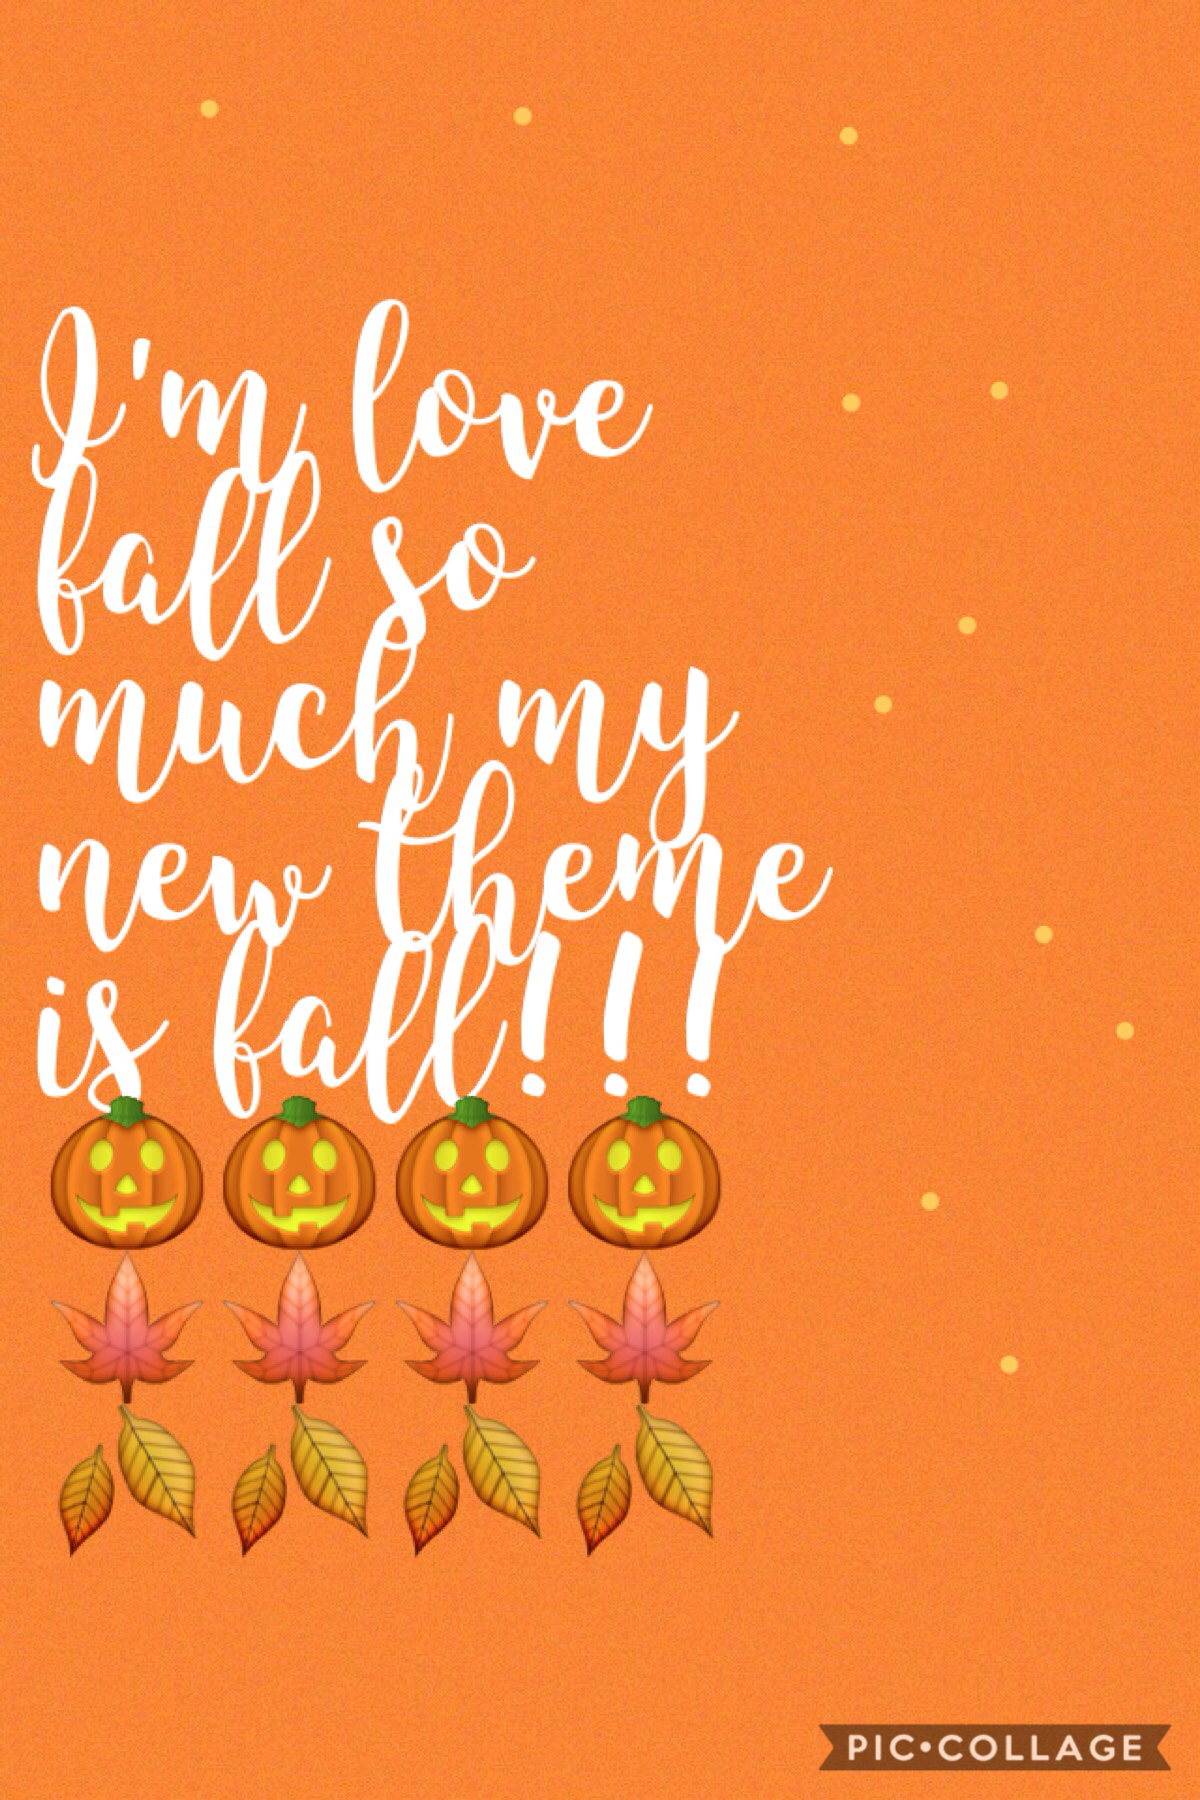 Tap
Sooo....I'm just ready for fall so I'm just going to make my colleges that theme